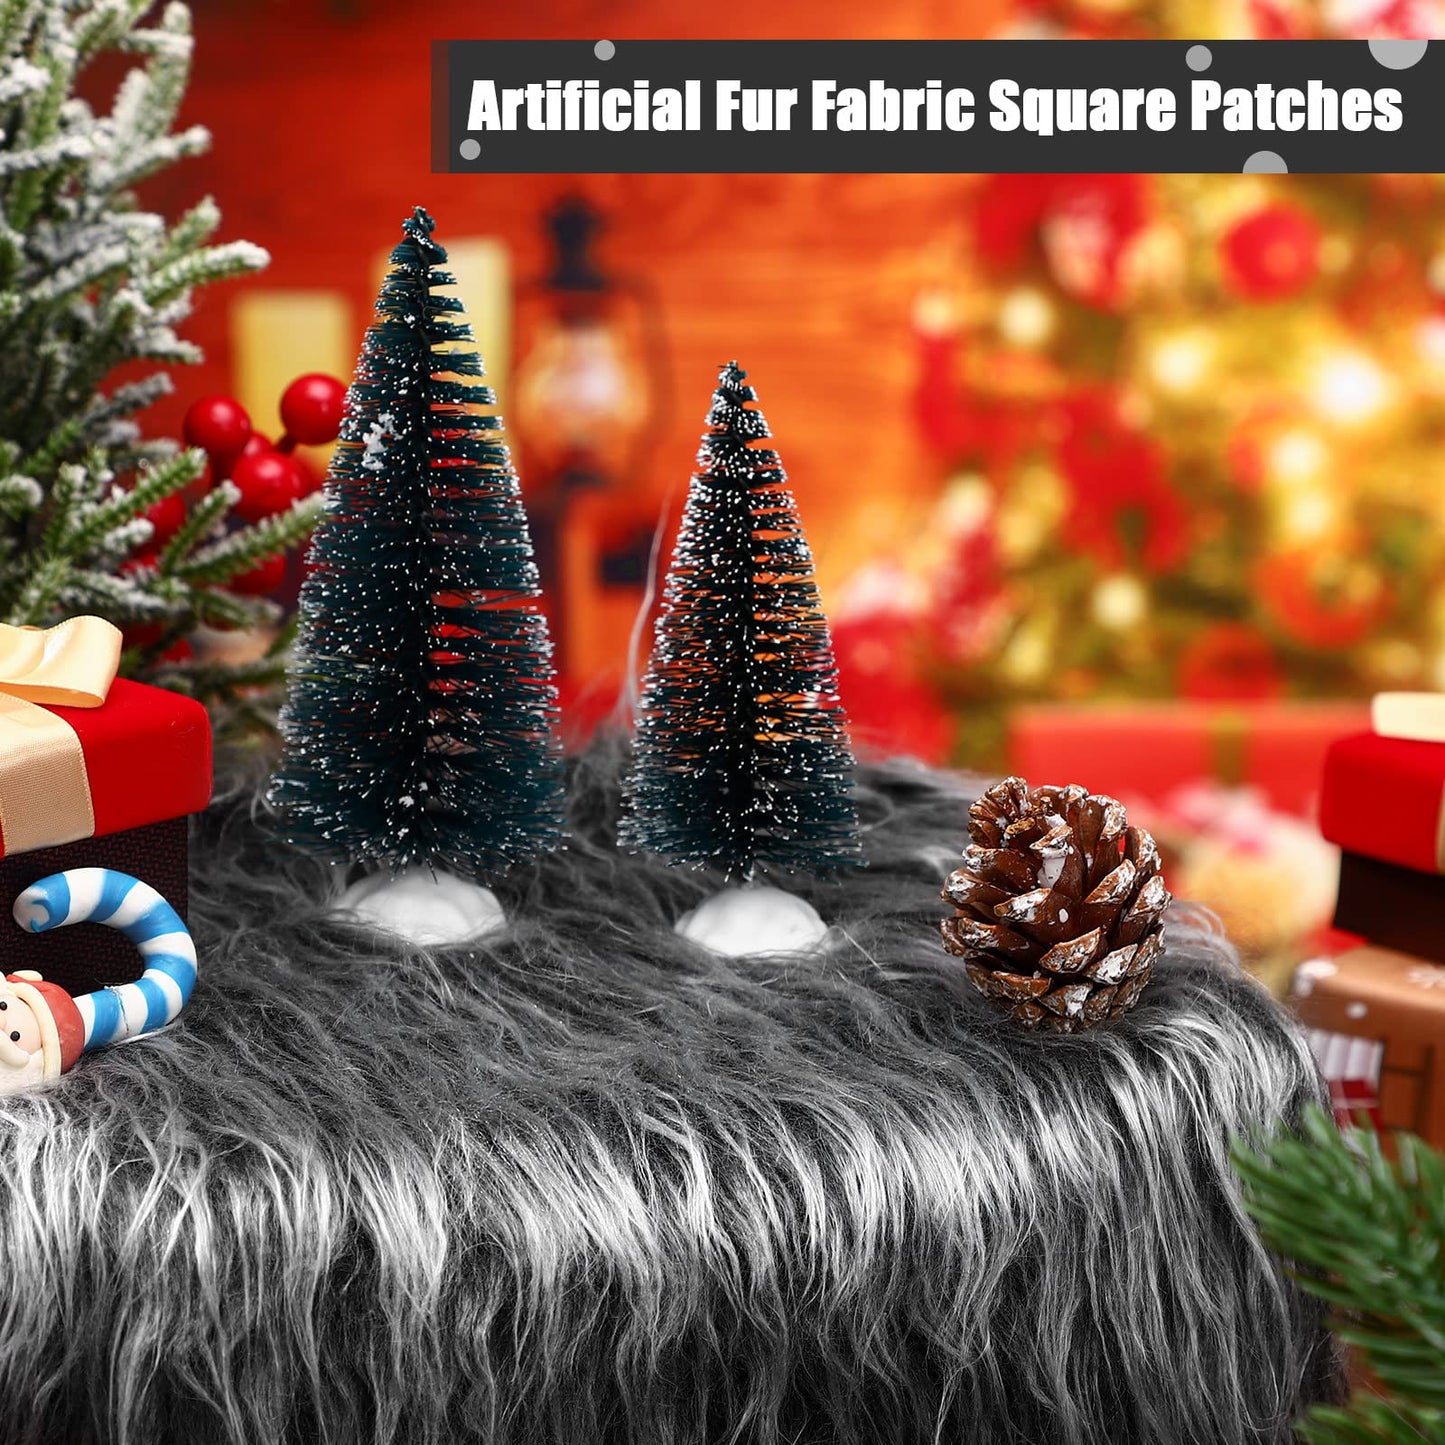 4 Pcs Christmas Faux Fur 10 x 20 Inch Faux Fur Fabric Squares Shaggy Fluffy Fabric Patches Ultra Soft Plush Craft and Hobby Fabric Craft Supply, Halloween Costume, Decoration (Grey)